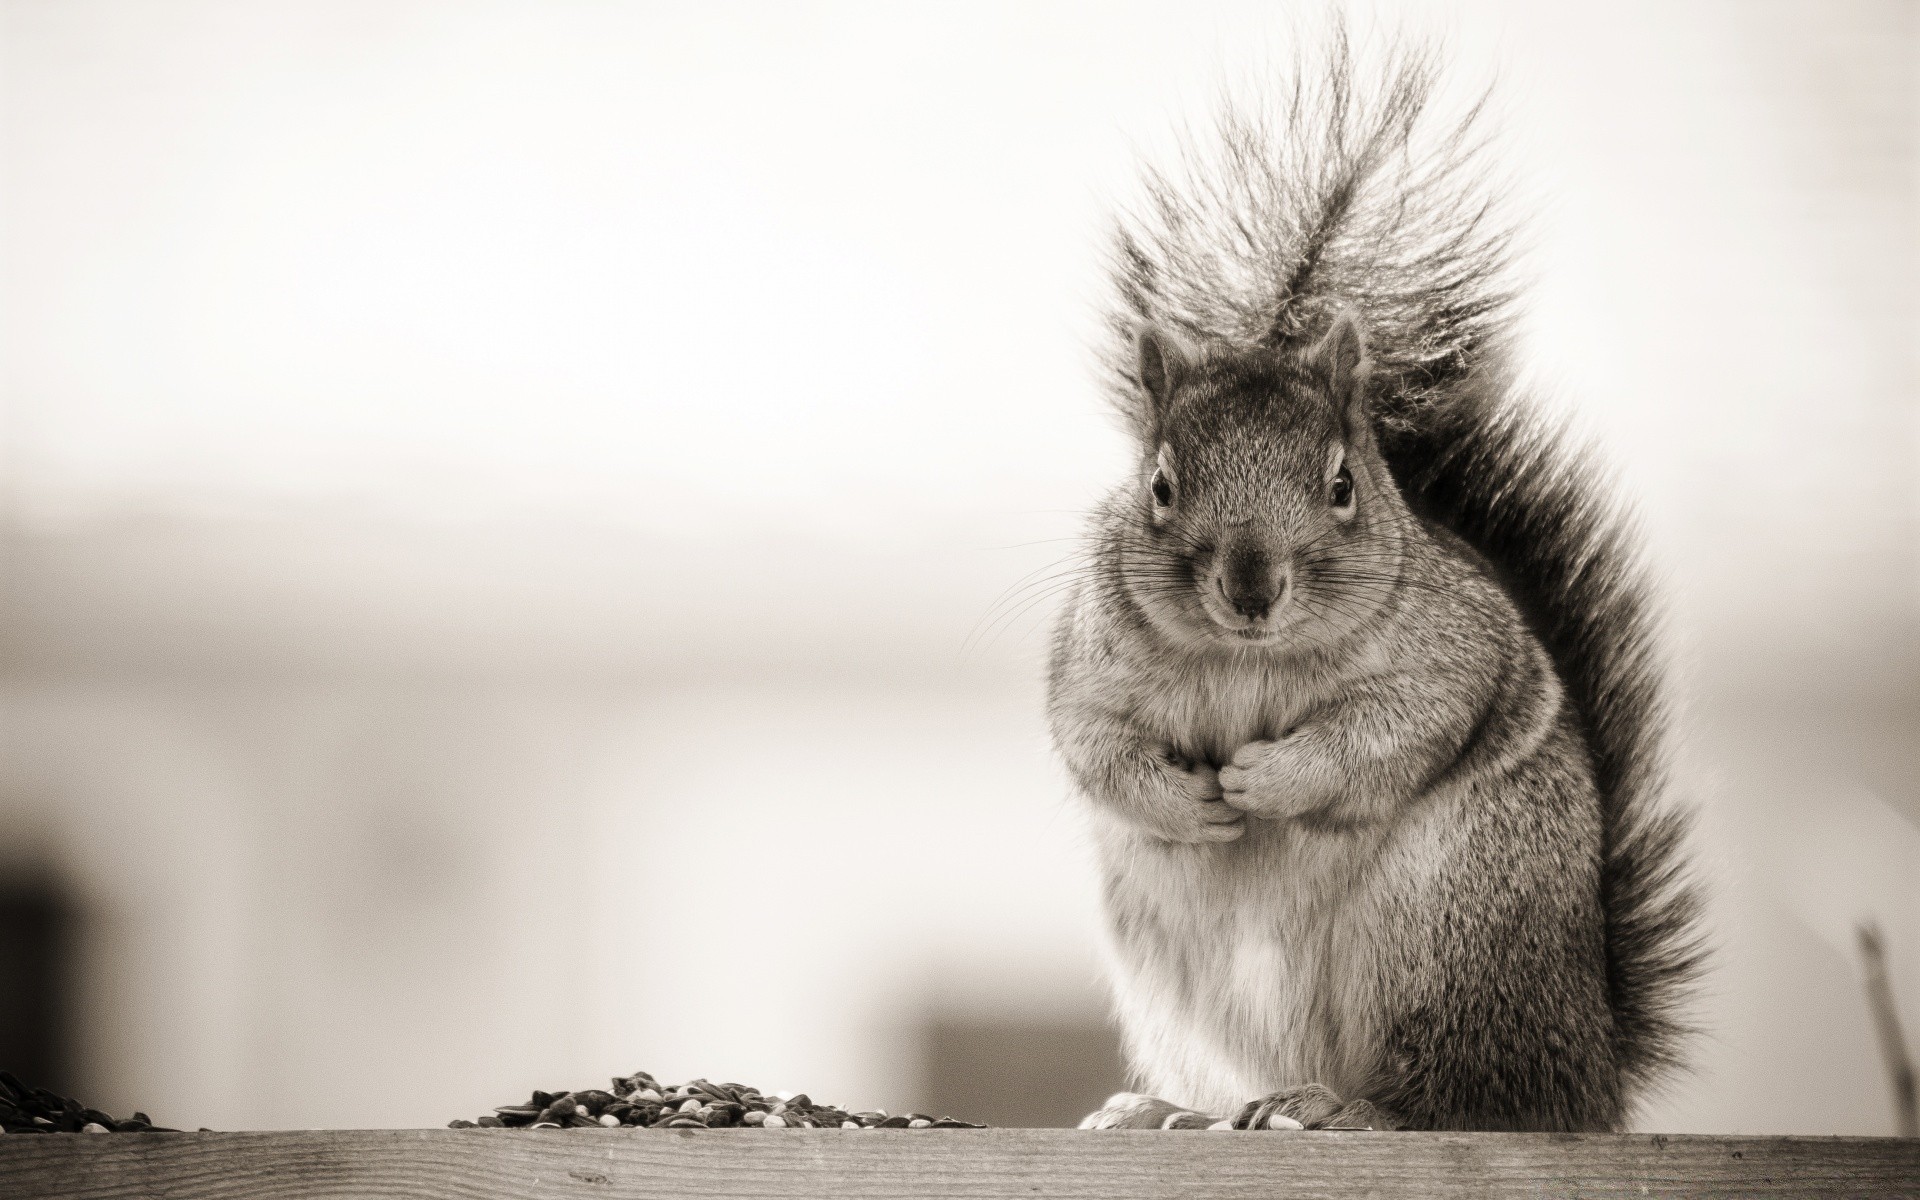 humor and satire mammal one portrait cute sit wildlife nature squirrel fur rodent monochrome animal hair